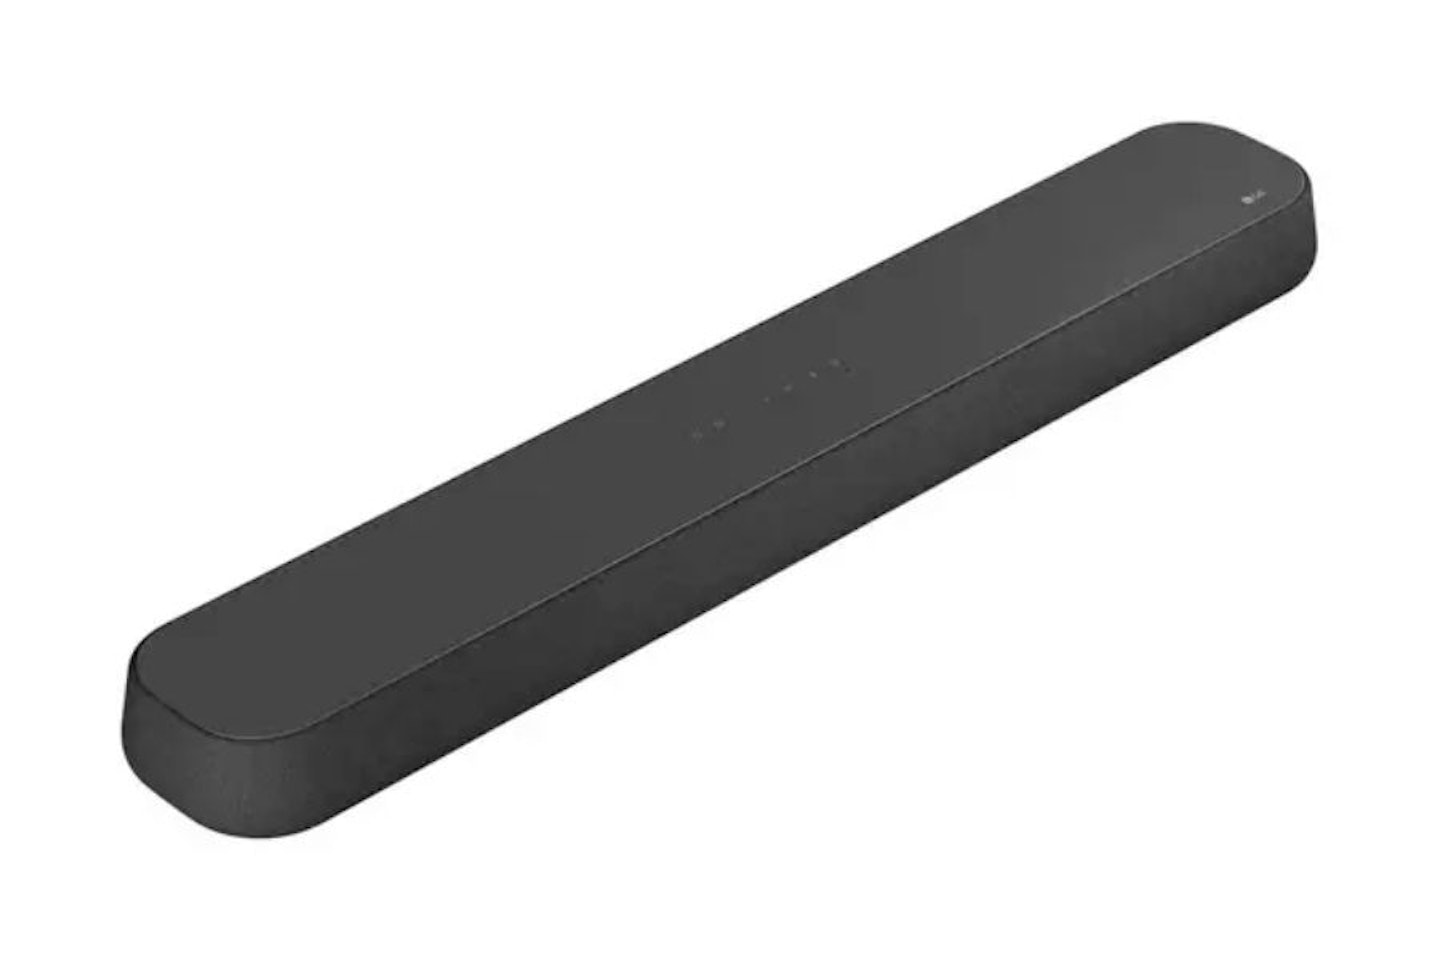 LG USE6S 3.0 All-in-One Sound Bar with Dolby Atmos